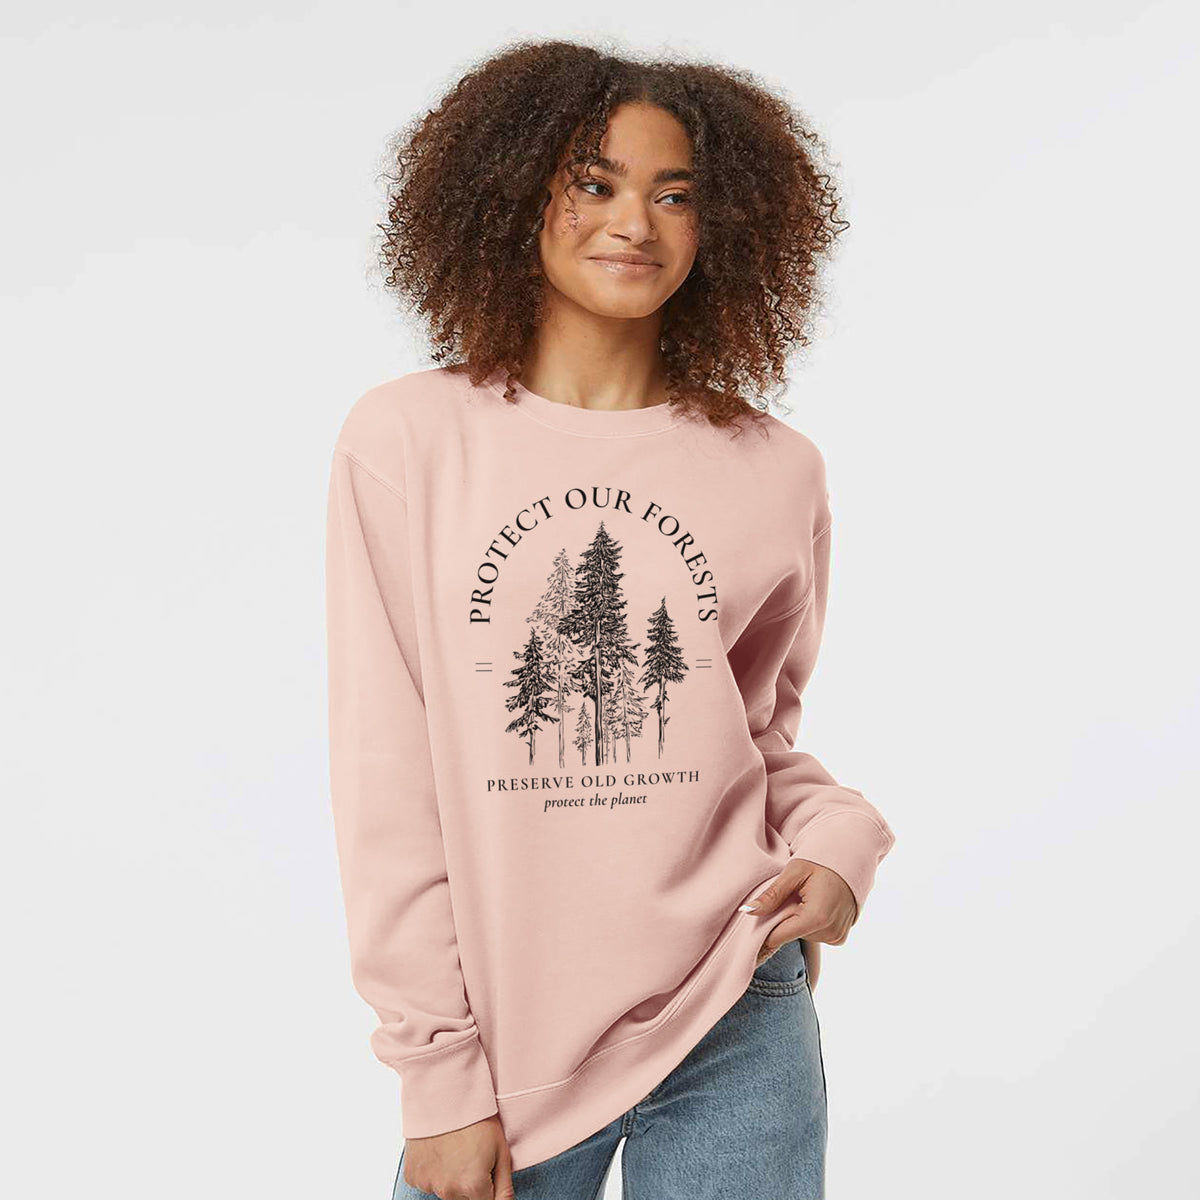 Protect our Forests - Preserve Old Growth - Unisex Pigment Dyed Crew Sweatshirt